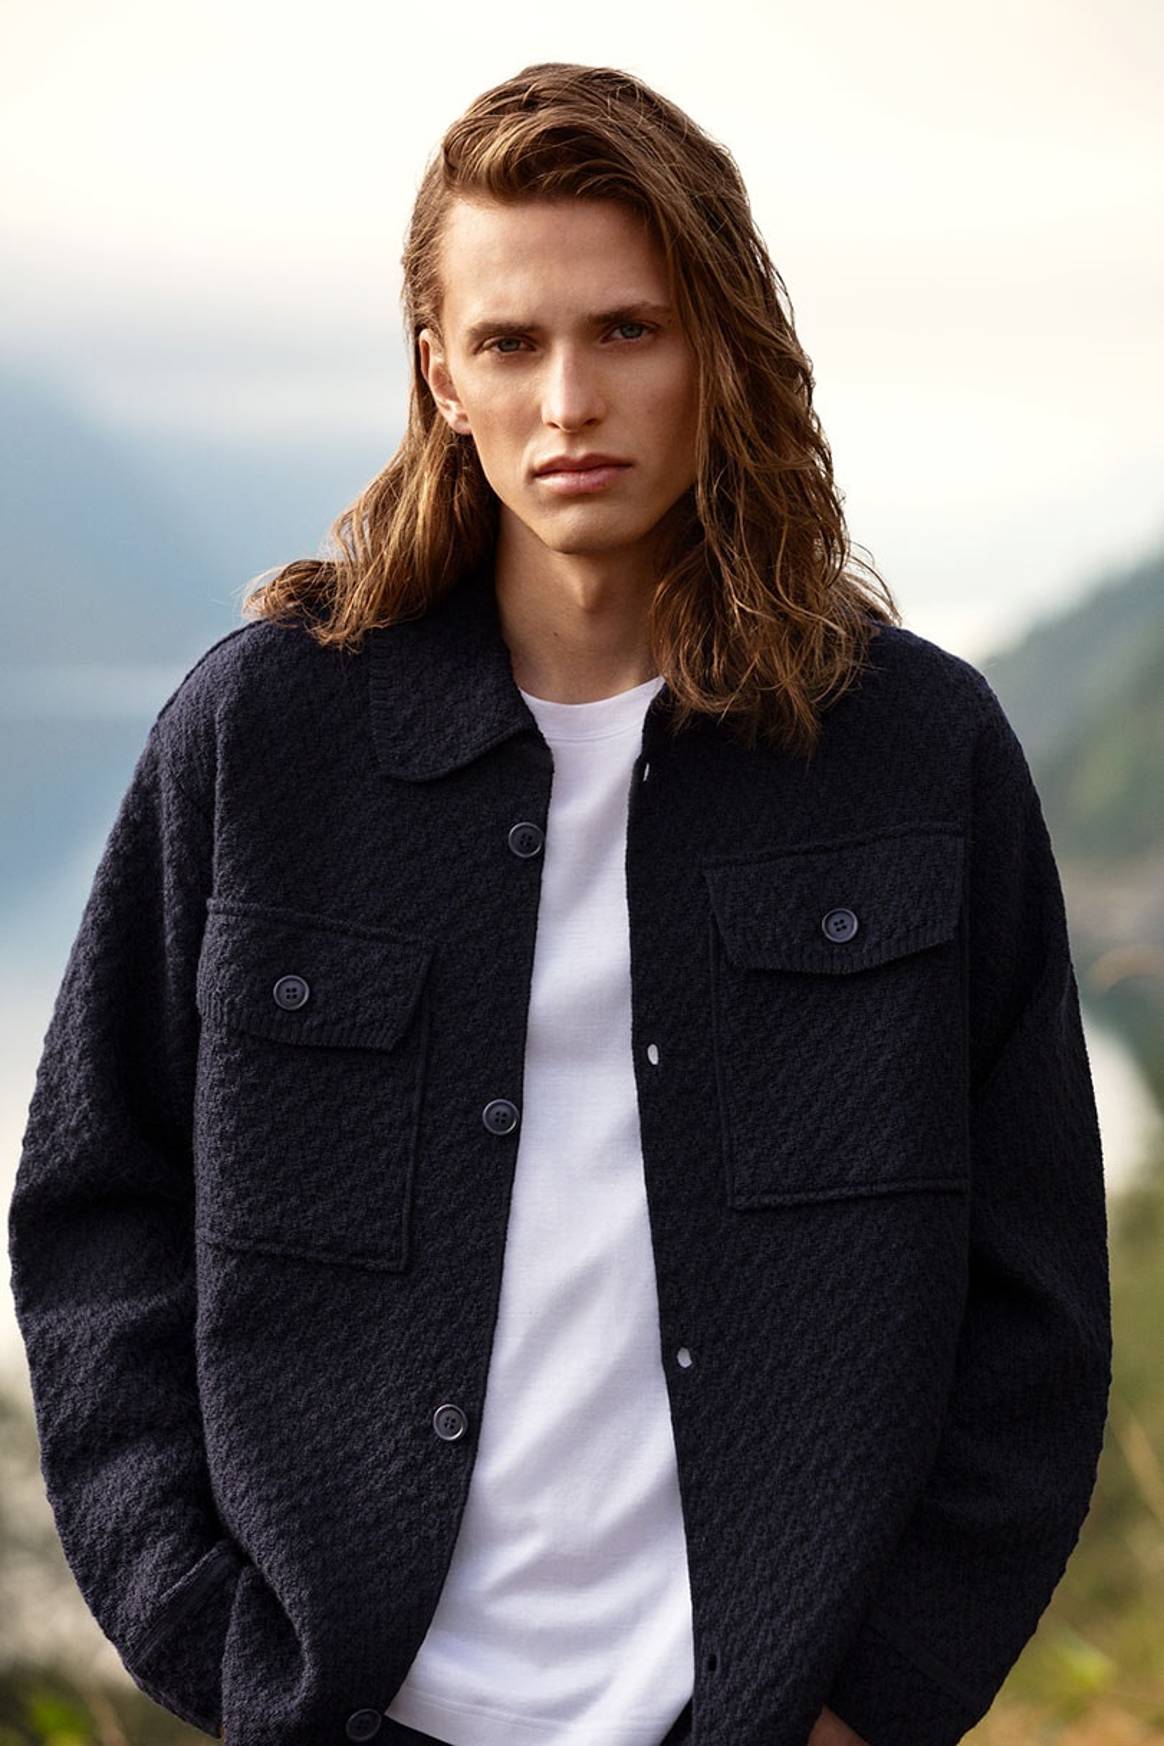 Two x heritage: Eton launches Exclusive Collaboration with knitwear specialist Dale of Norway